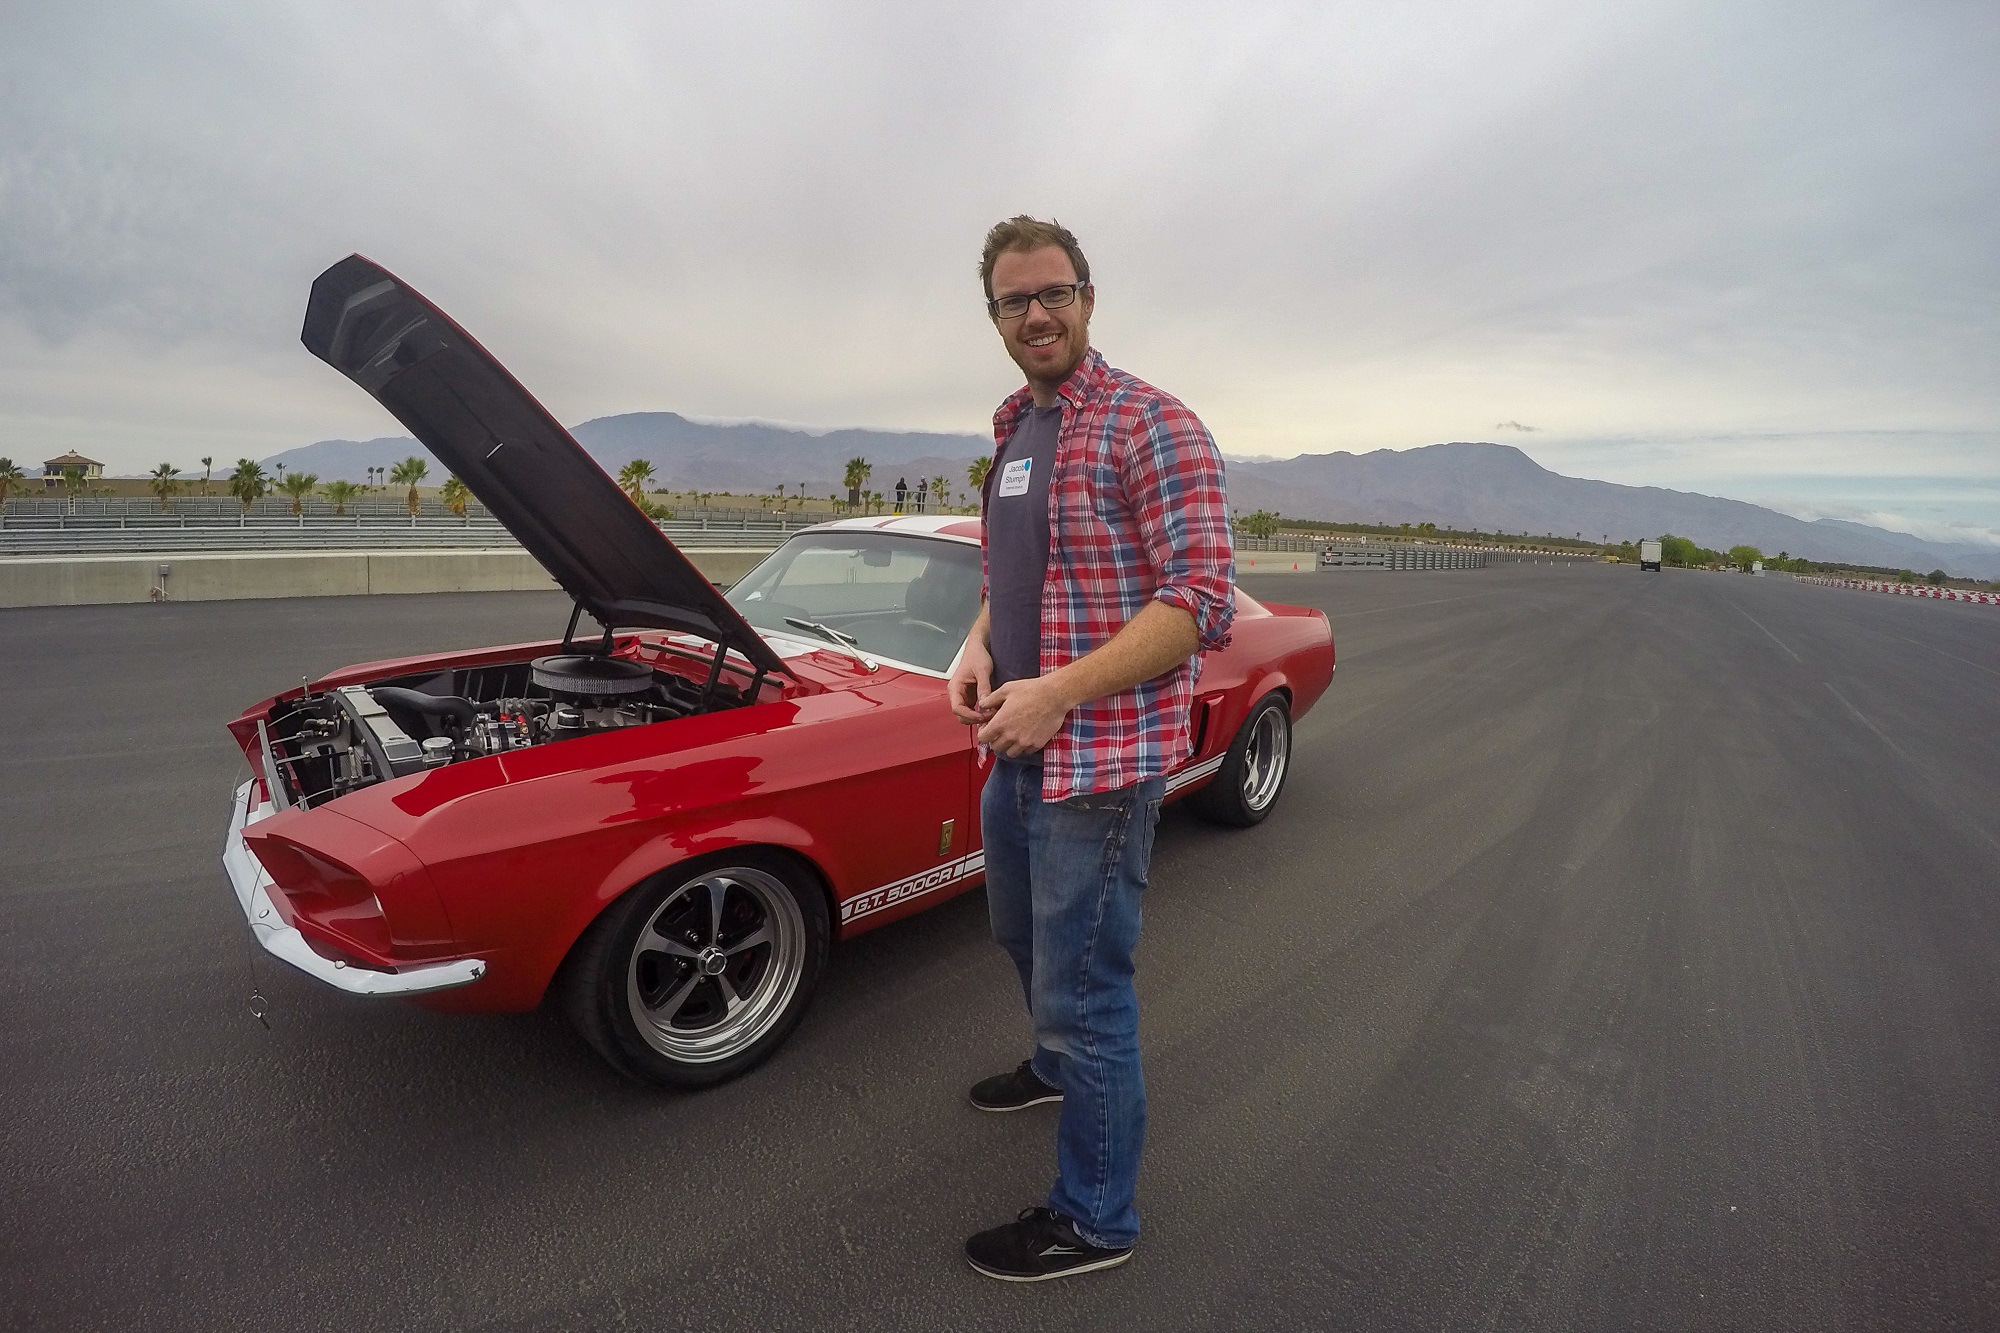 6SpeedOnline.com 1967 Ford Shelby Mustang GT500 CR Classic Recreations The Thermal Club Track Drive Review